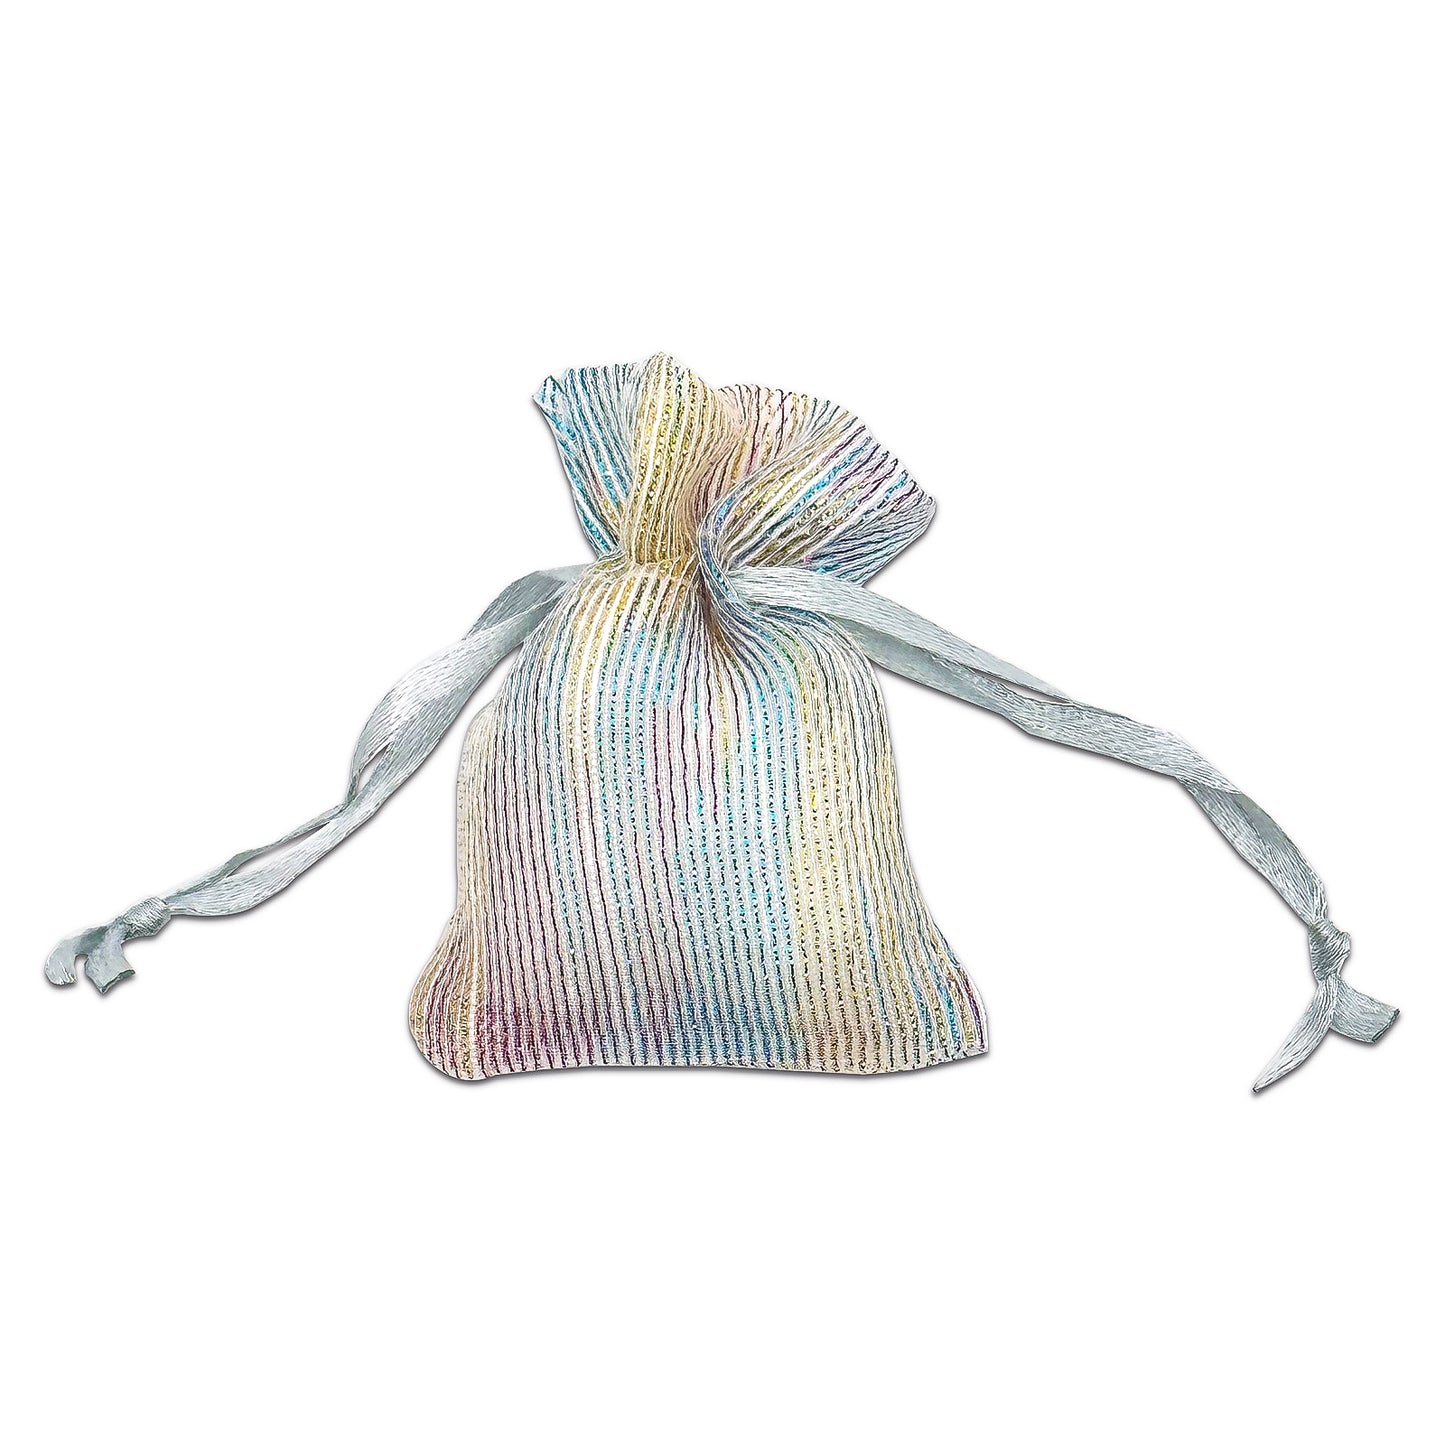 Iridescent Striped Weave Organza Drawstring Pouch Gift Bags